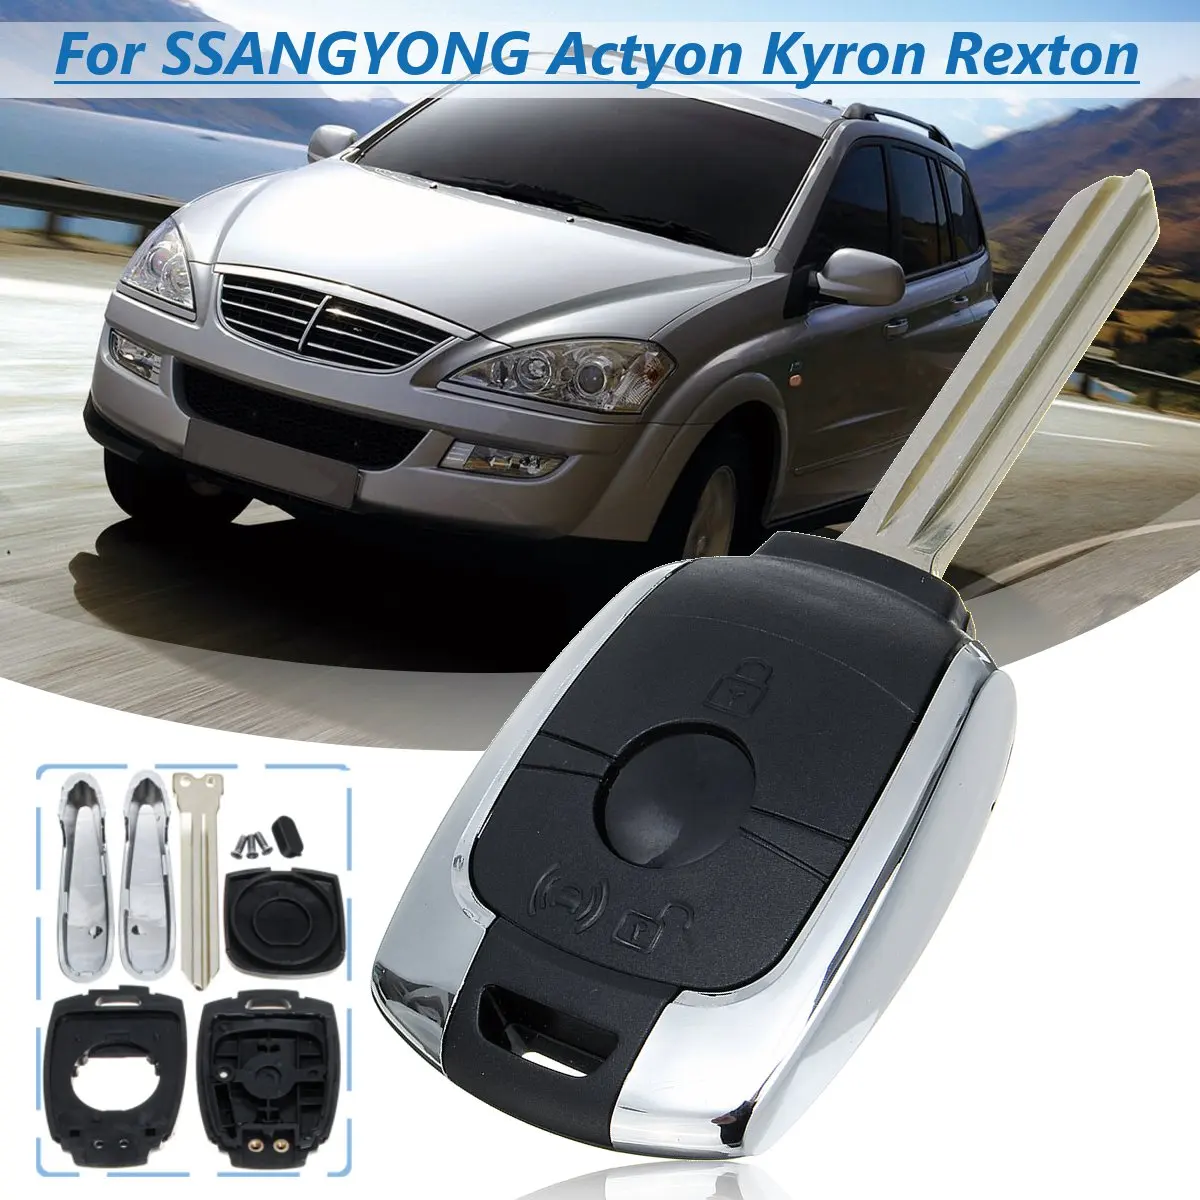 

1X/2X 2 Buttons Remote Key Shell Case Fob for SsangYong Actyon Kyron Rexton Korando With Uncut Blade Replacement Part